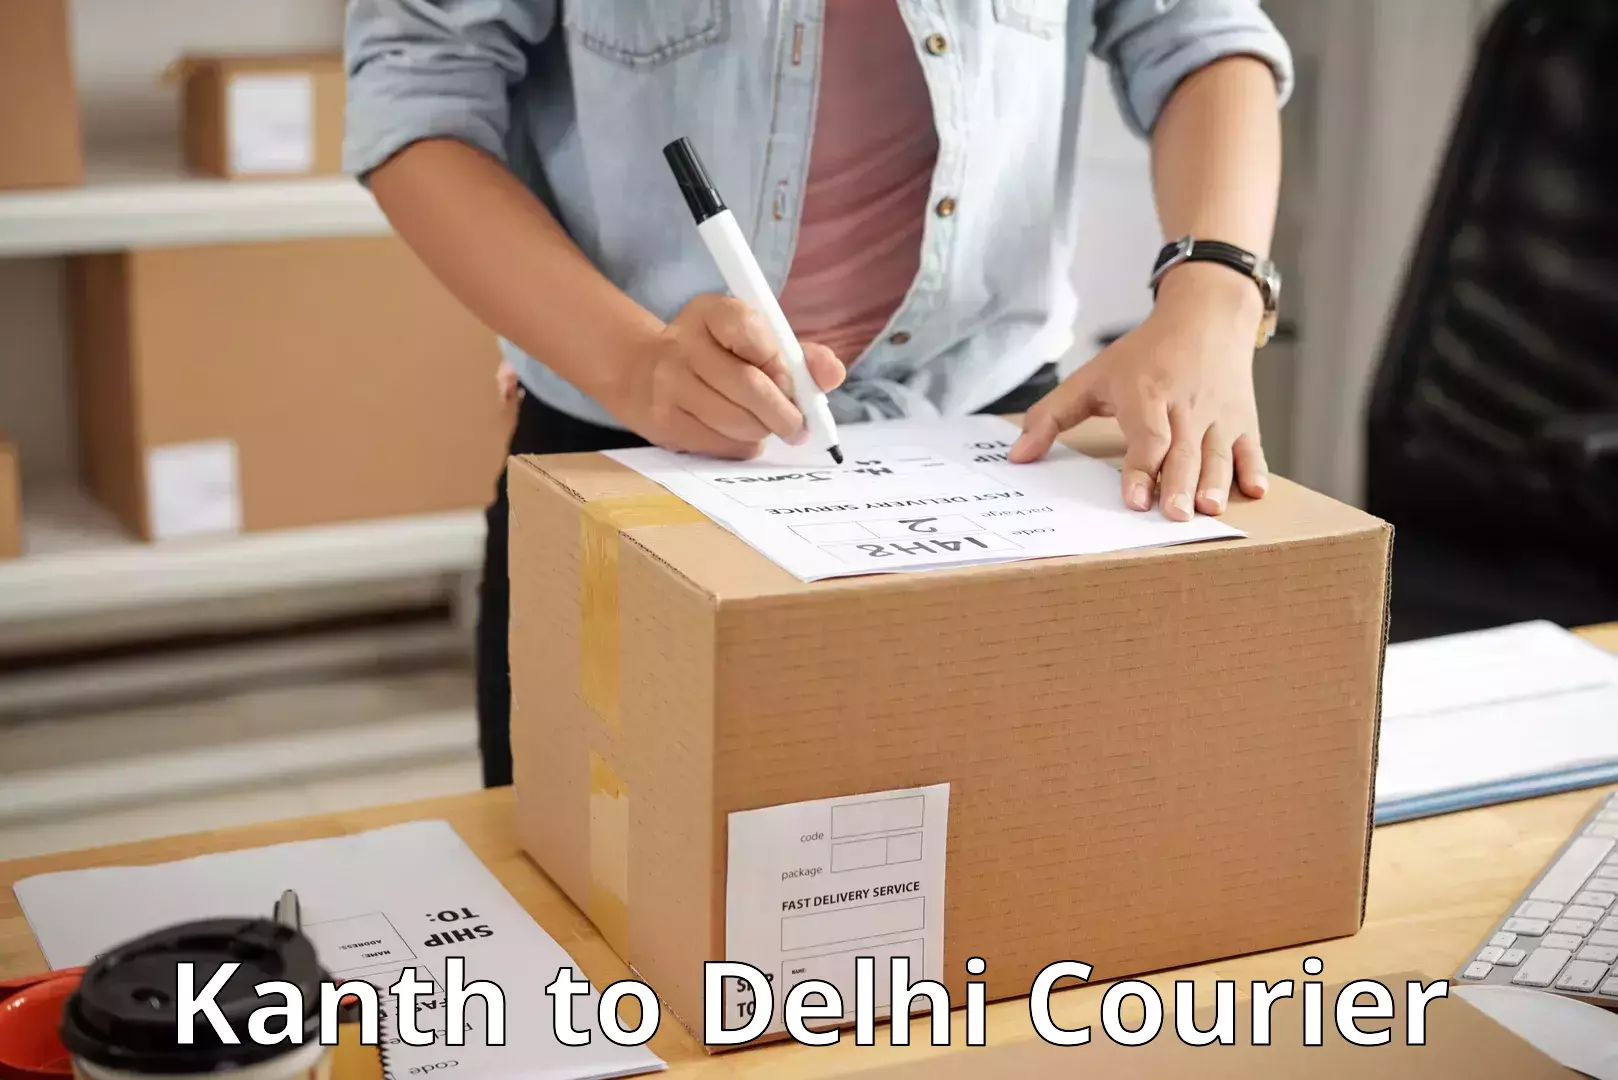 International courier networks Kanth to NCR